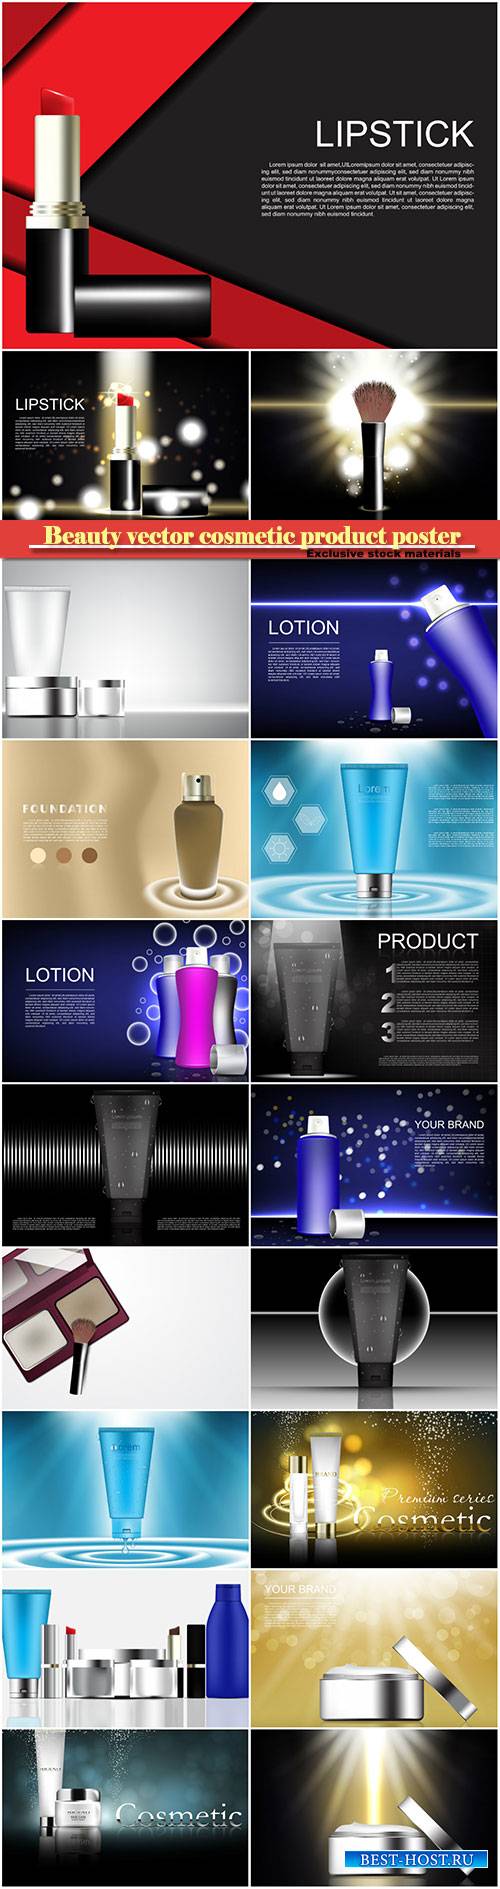 Beauty vector cosmetic product poster #3